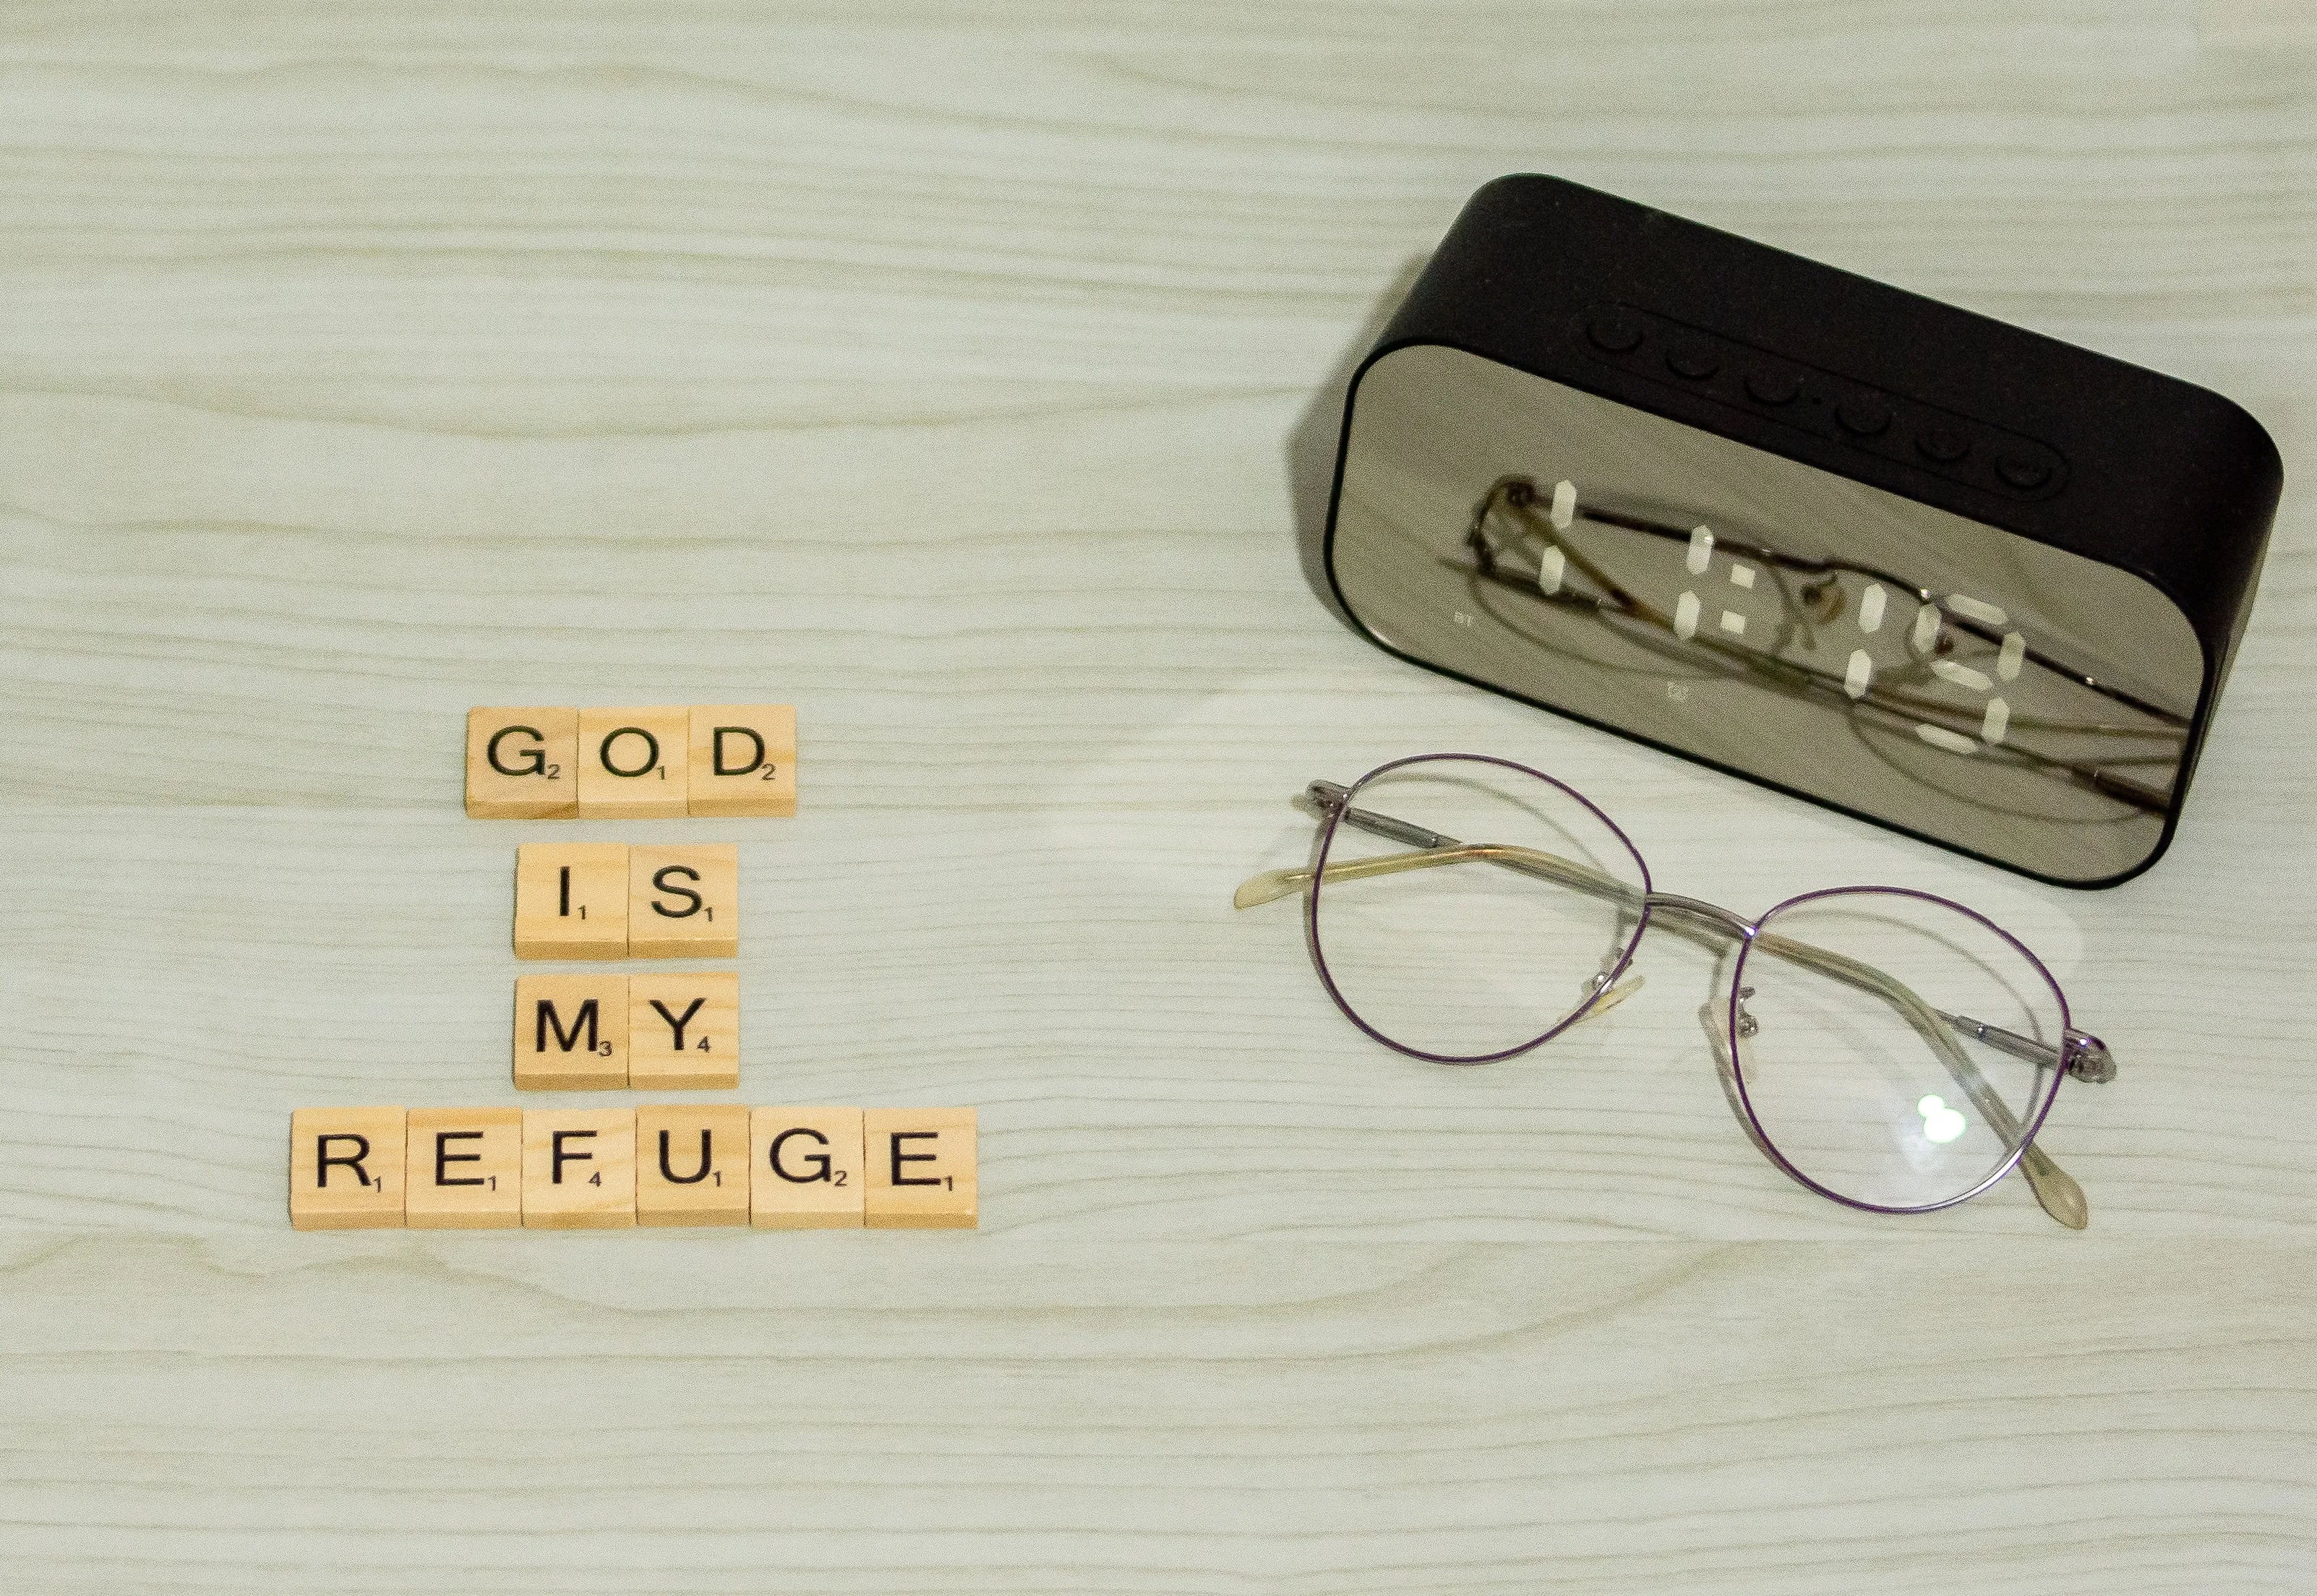 The letters spell out 'God is my refuge.' in Scrabble.